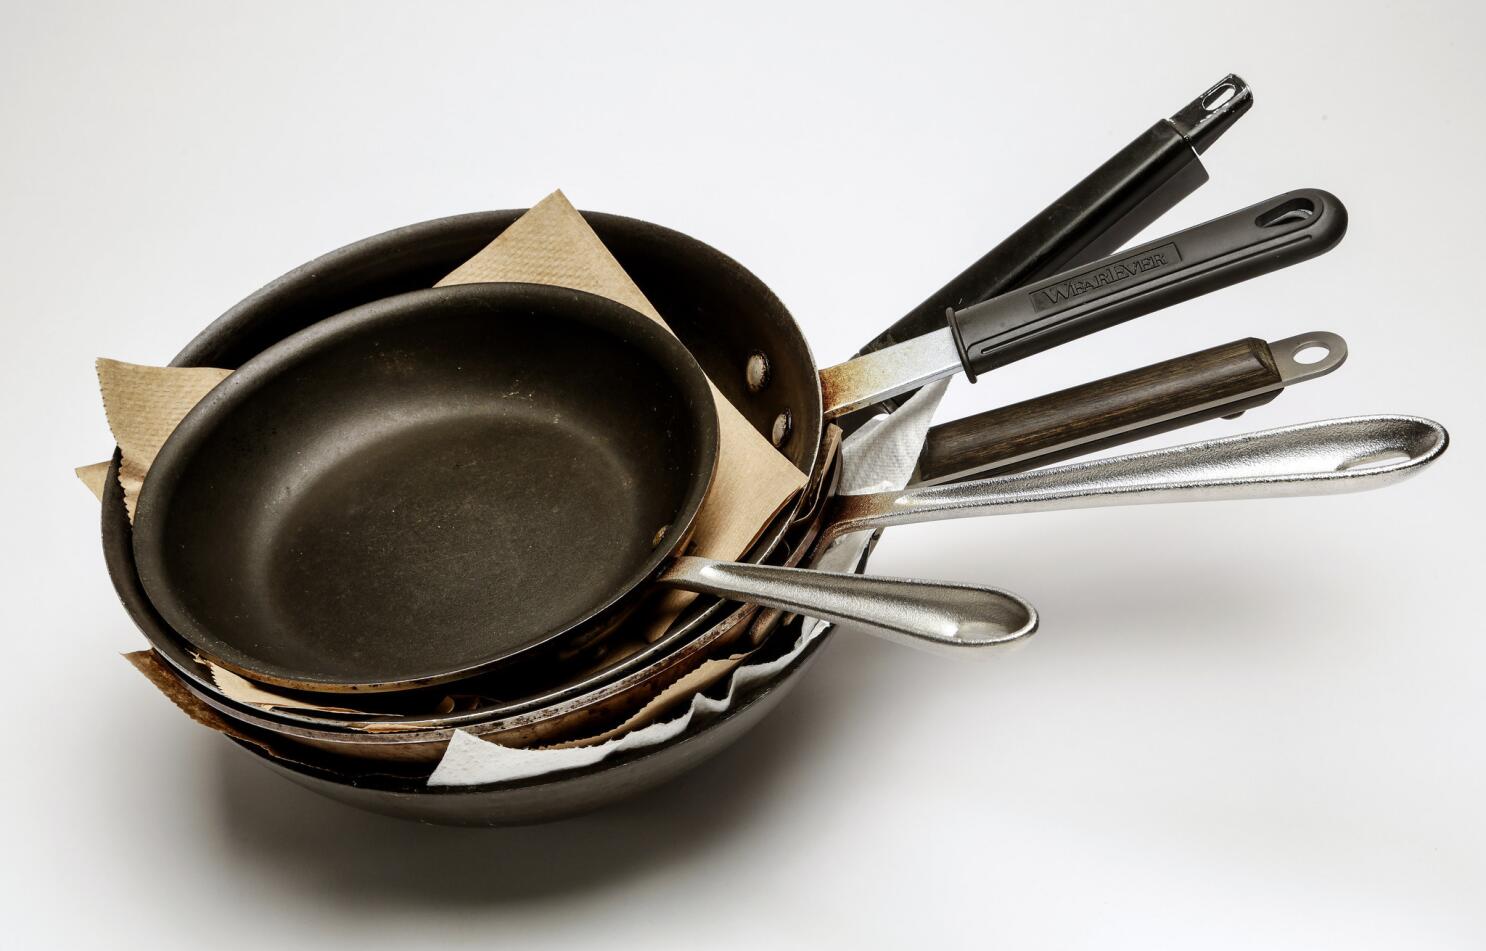 Is It Safe To Use Scratched Nonstick Pans? Here's What Experts Say